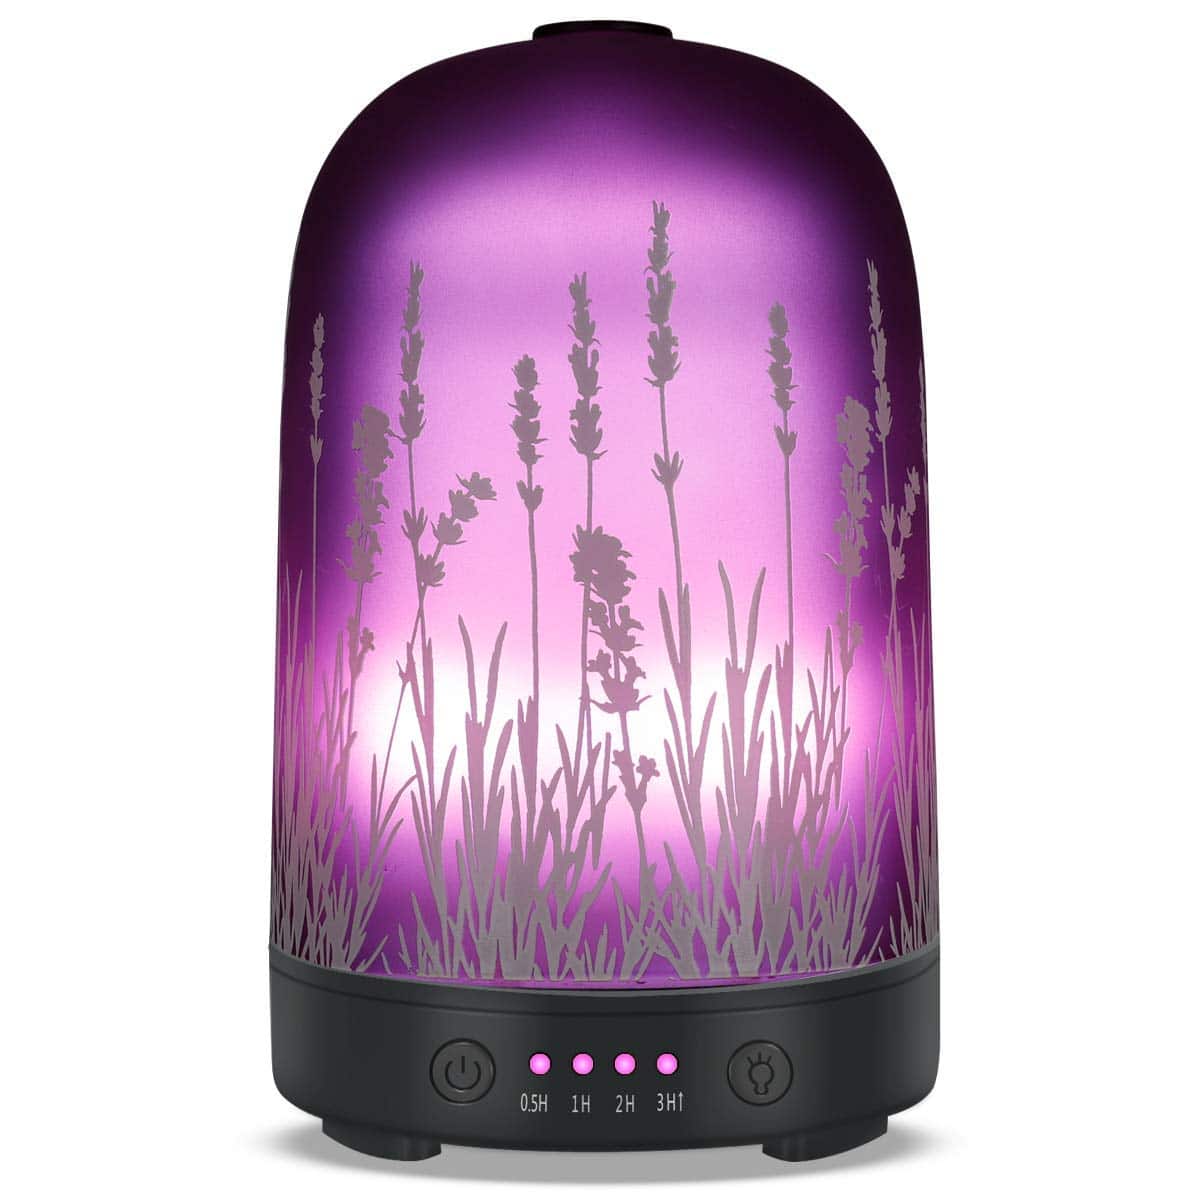 best oil diffusers, best oil diffuser, scent diffuser, essential oil diffuser, doterra diffuser, best oil diffuser, best essential oil diffuser 2016, ultrasonic diffuser, best essential oil diffuser, oil diffuser, essential oil diffuser doterra, ultrasonic essential oil diffuser, young living essential oil diffuser, doterra oil diffuser, essential oil water diffuser, essential oil diffuser reviews, water diffuser, aroma oil diffuser, young living oil diffuser, best essential oil diffuser 2017, aromatherapy diffuser reviews, essential oil mister diffuser, best oil diffuser 2017, essential oil air diffuser, oil diffuser reviews, diffuser reviews, essential oil diffuser comparison, best aromatherapy diffuser, diffuser comparison, ultrasonic oil diffuser, essential oils and diffuser, best diffuser, essential oil dispenser, electric oil diffuser, amazon oil diffuser, electric essential oil diffuser, aromatherapy oil diffuser, what is a diffuser for essential oils, best essential oil diffuser 2016, diffuser, oil diffuser, aromatherpay diffuser, essential oil diffuser reviers